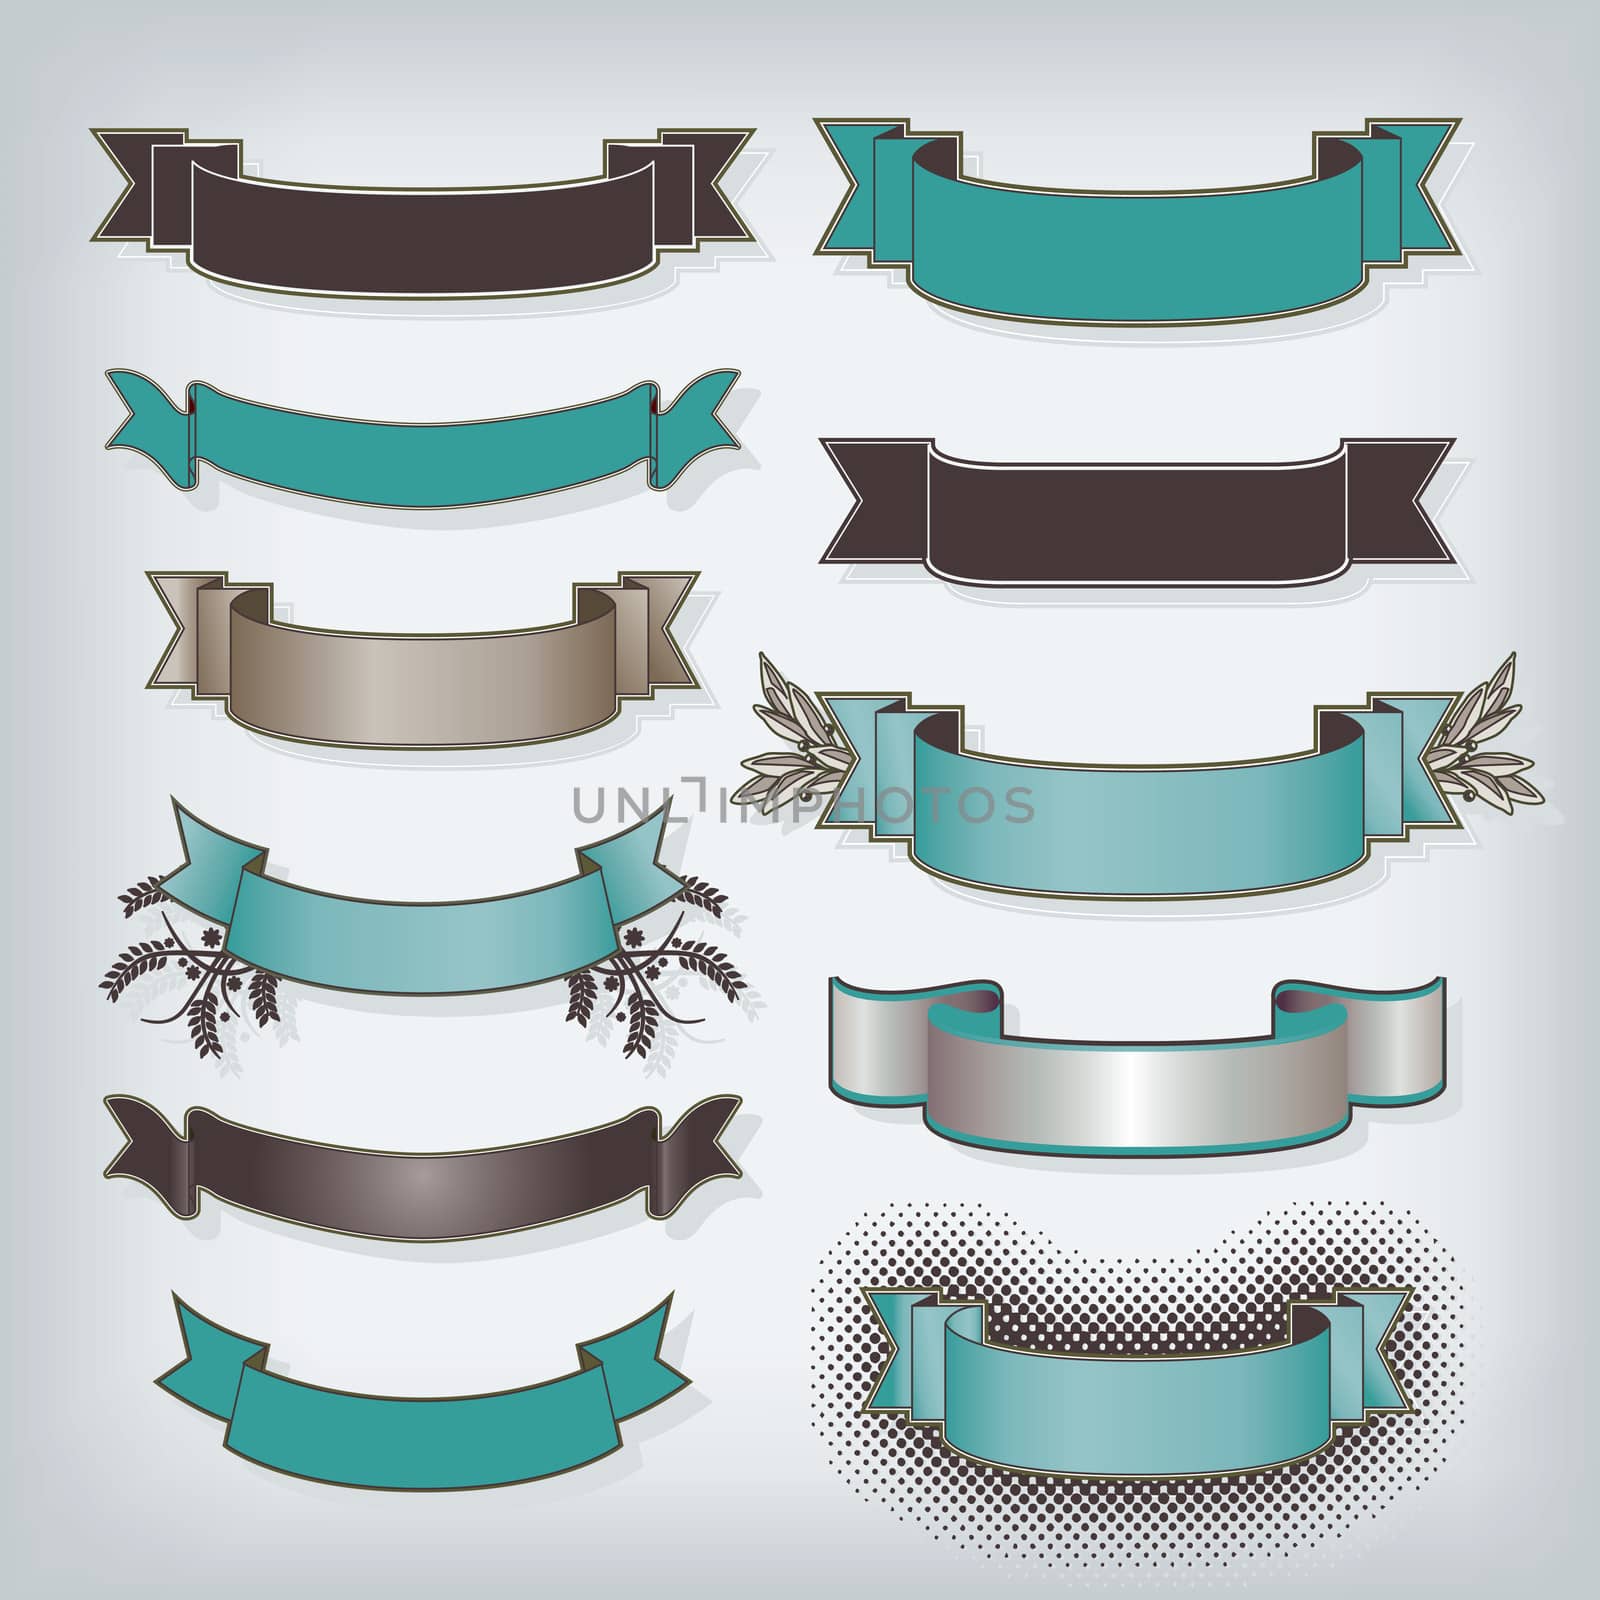 Eleven Banners in Teal with space for your text by mike301